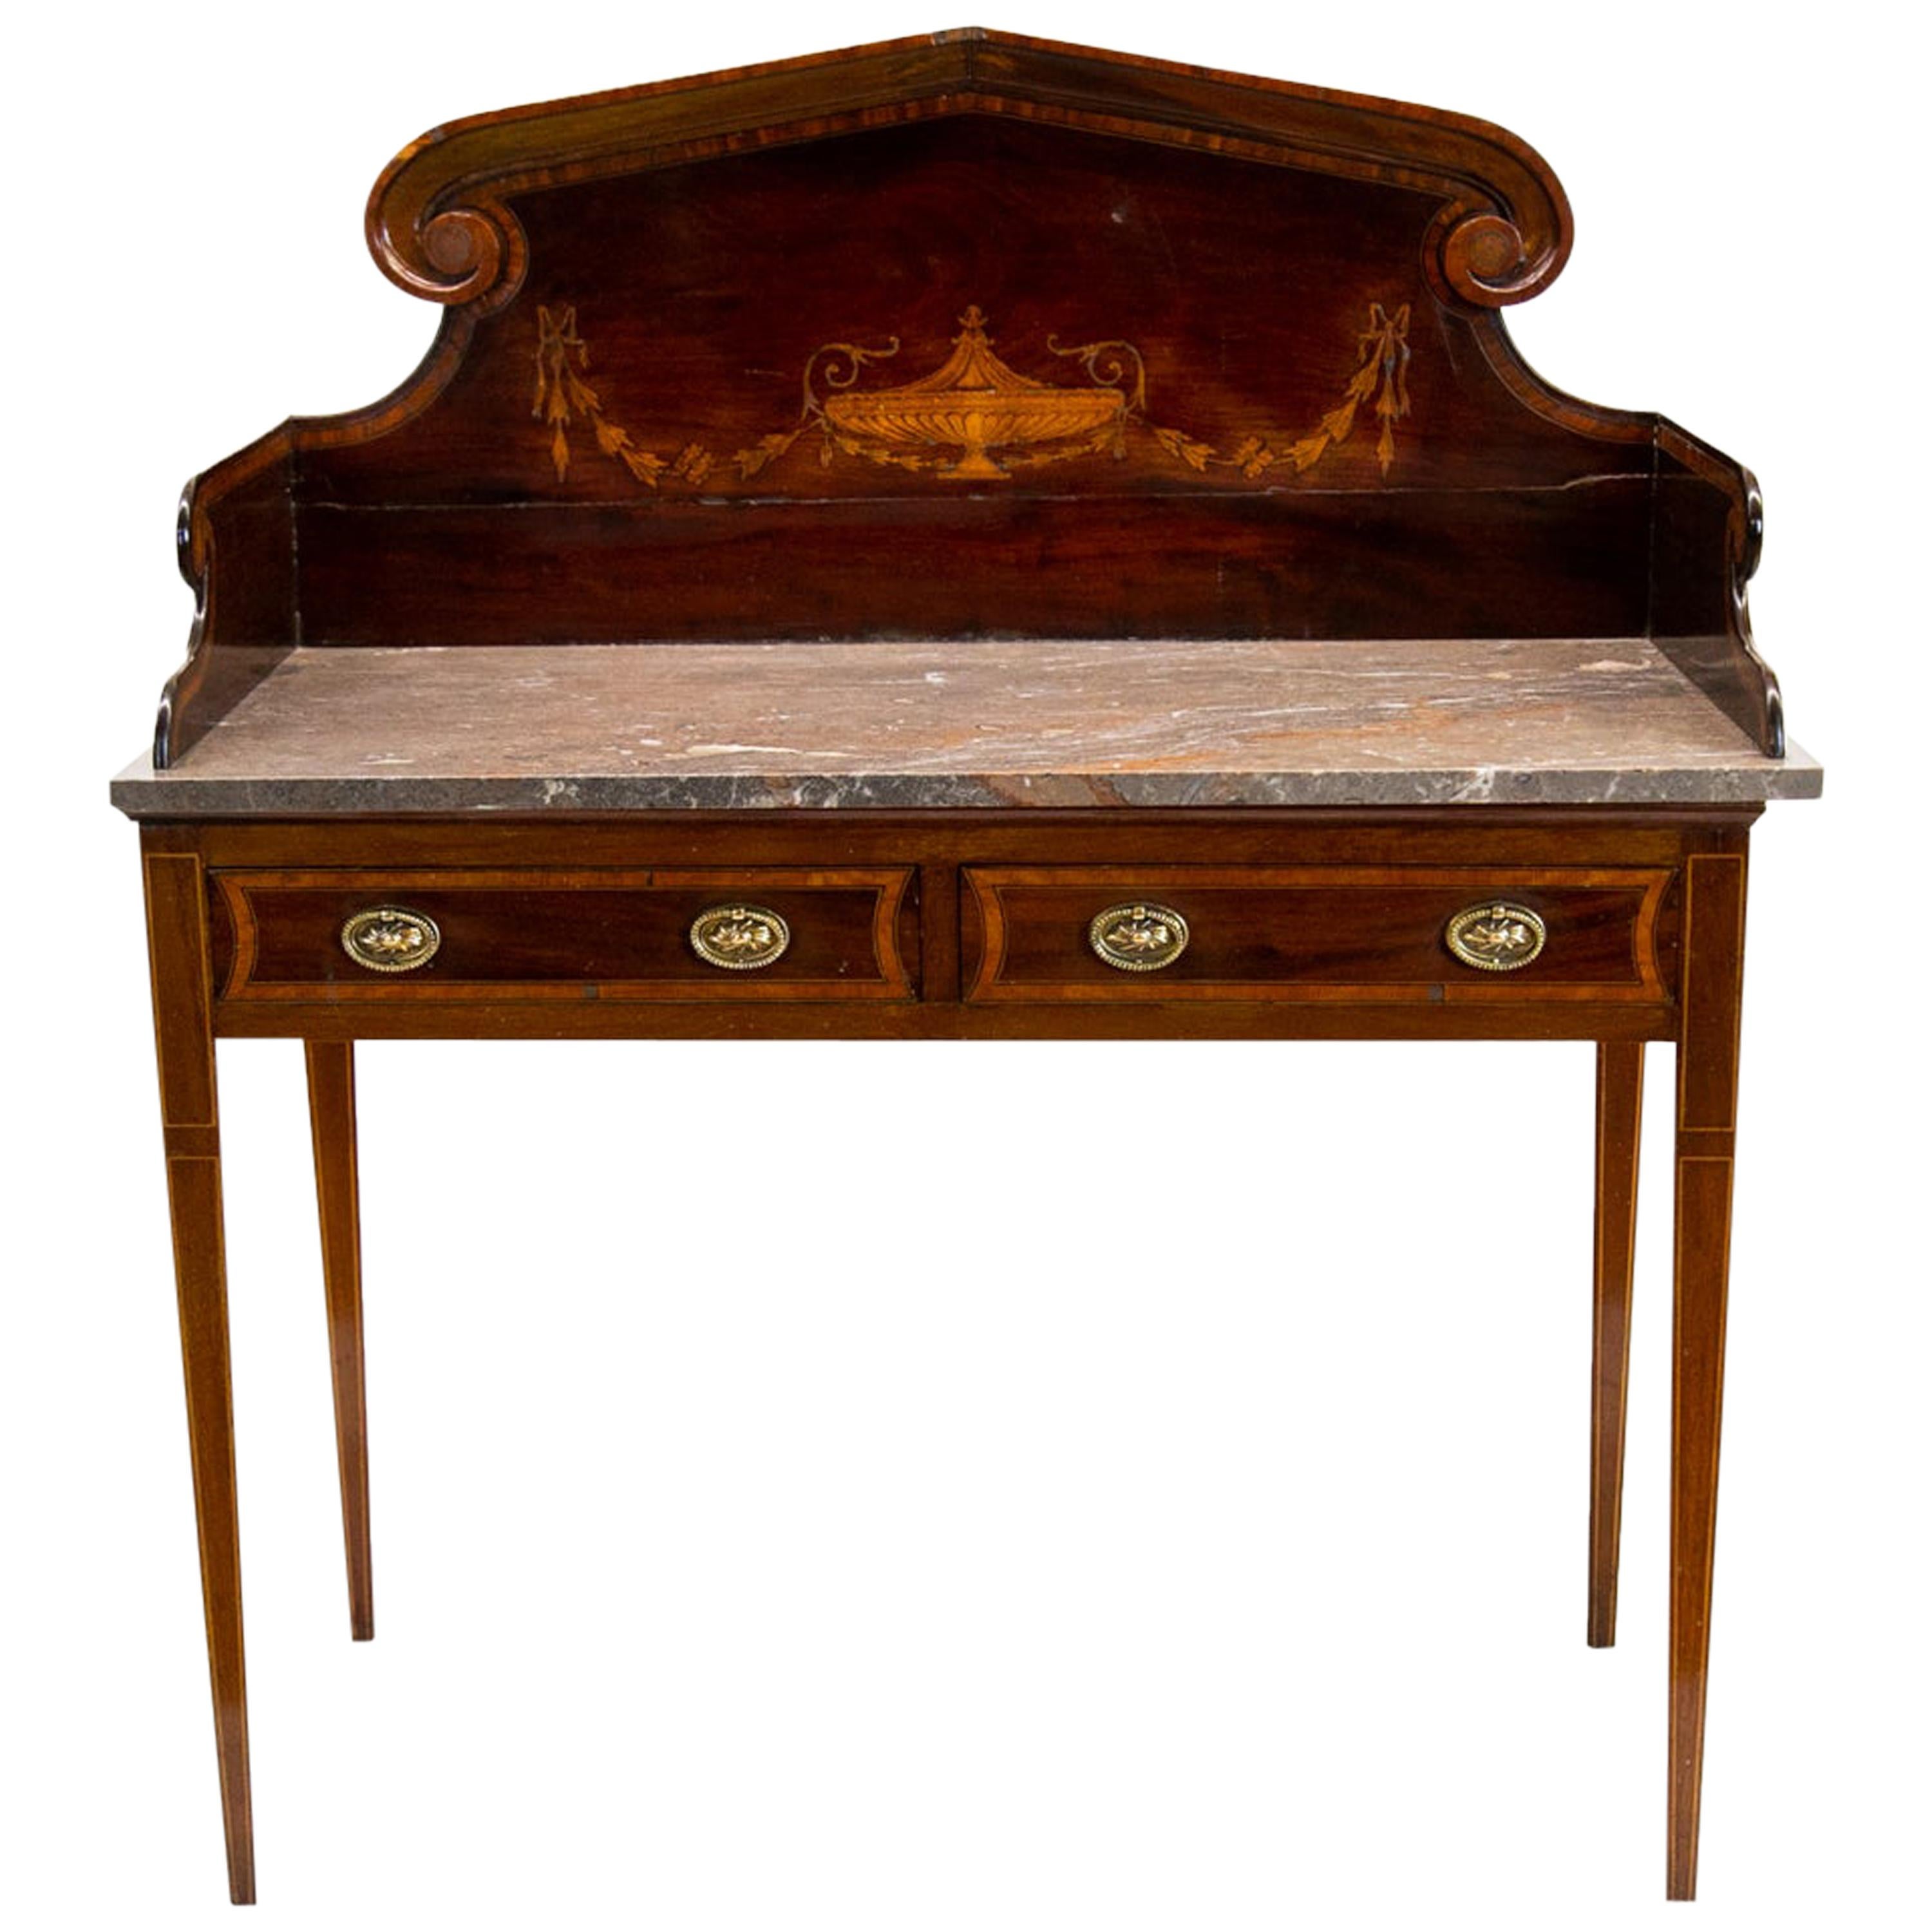 English Inlaid Marble-Top Serving Table